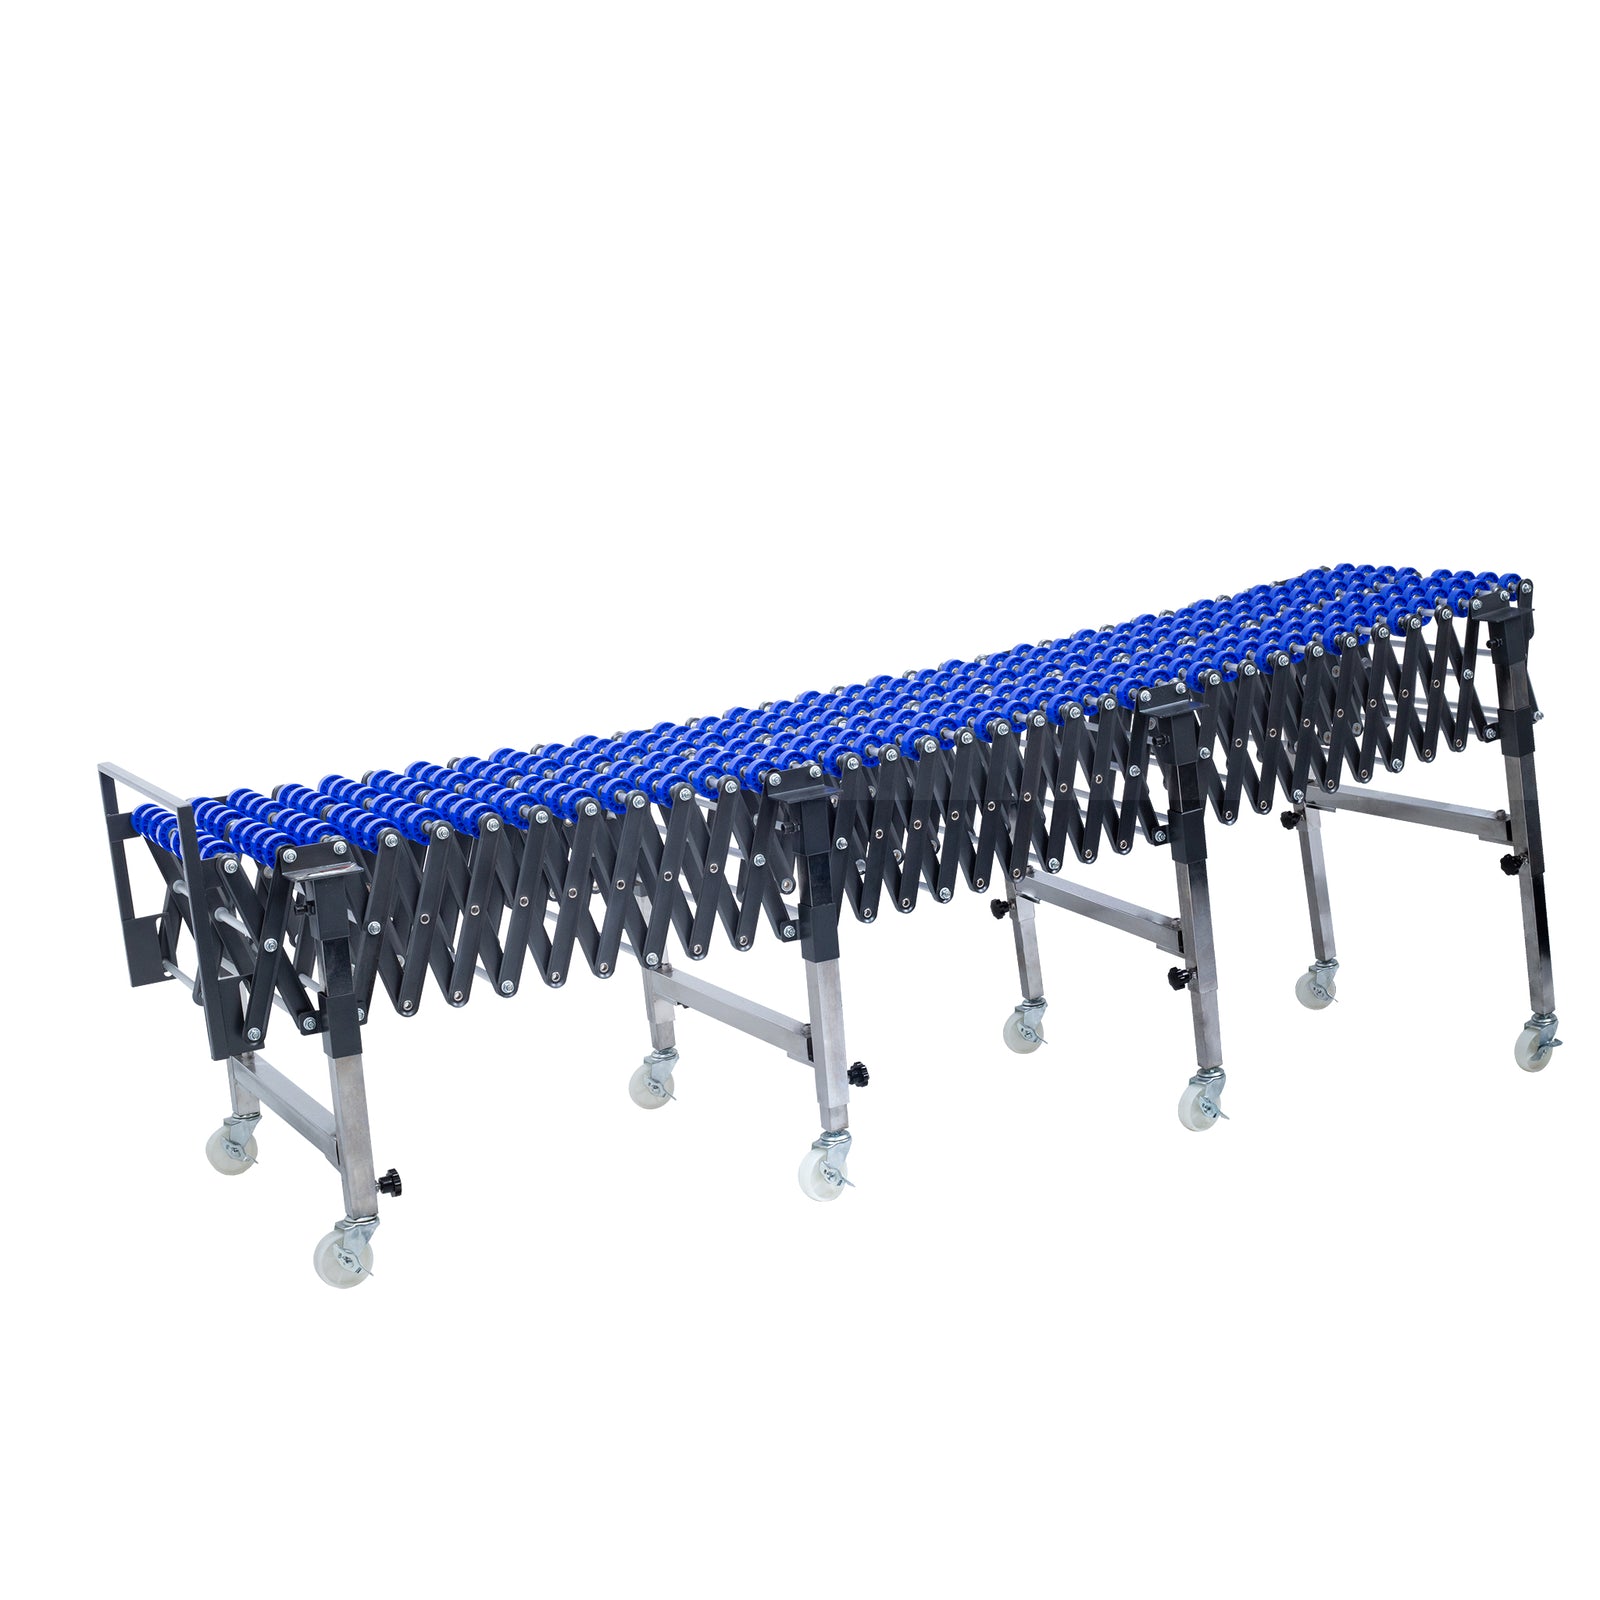 An expanded gravity skate wheel conveyor with steel frame, blue wheels, and white rolling casters over white background . Front side of the conveyor is lower that the far side